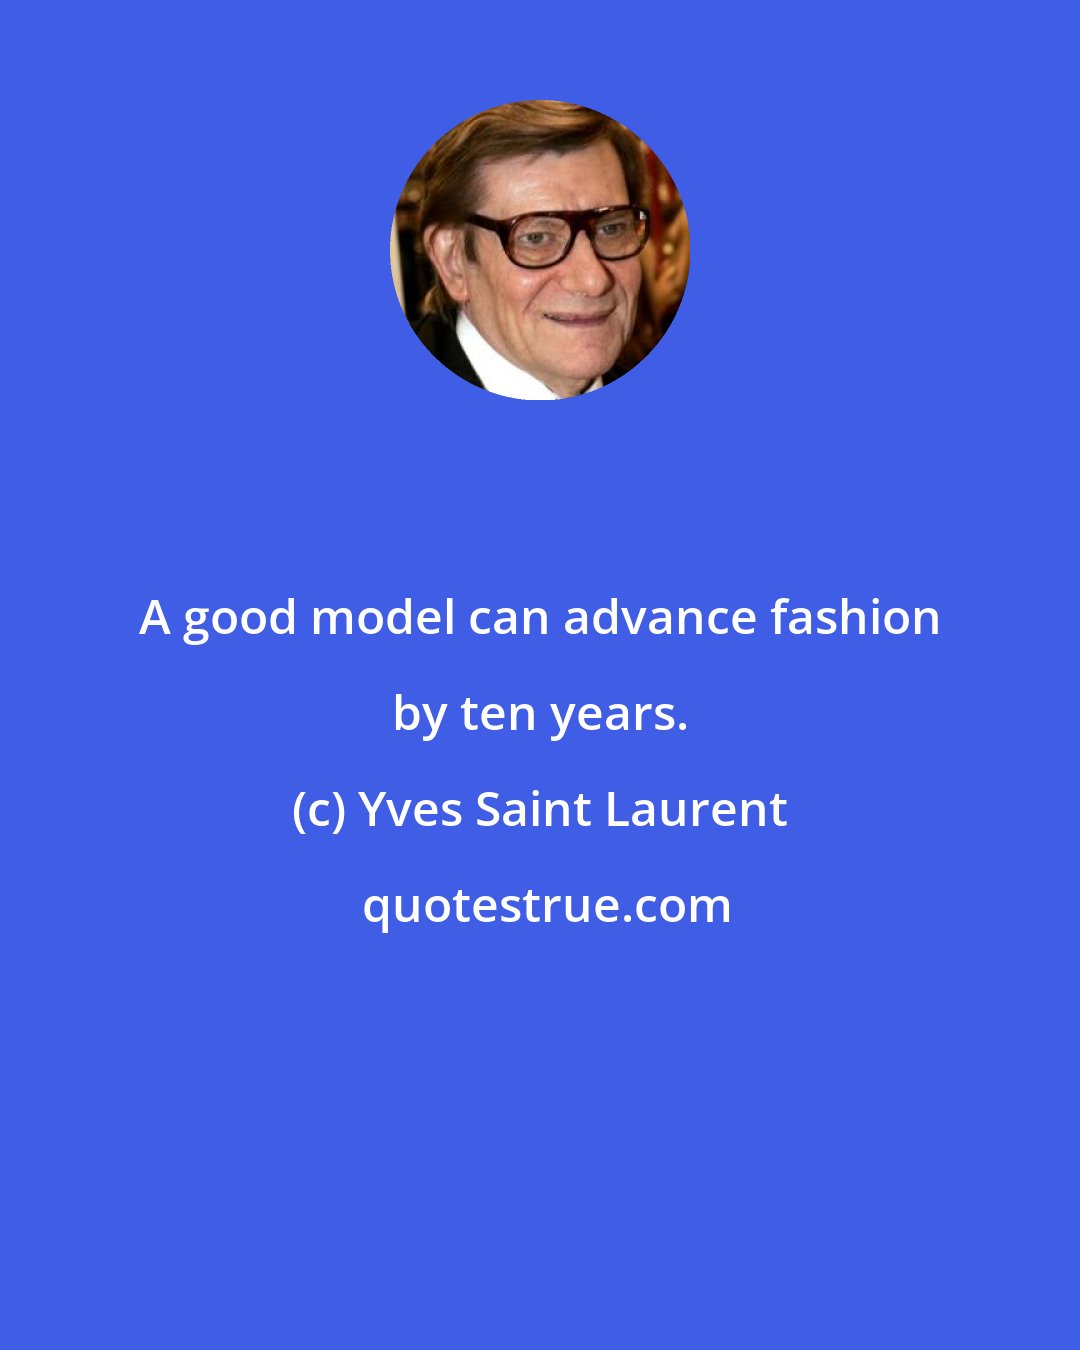 Yves Saint Laurent: A good model can advance fashion by ten years.